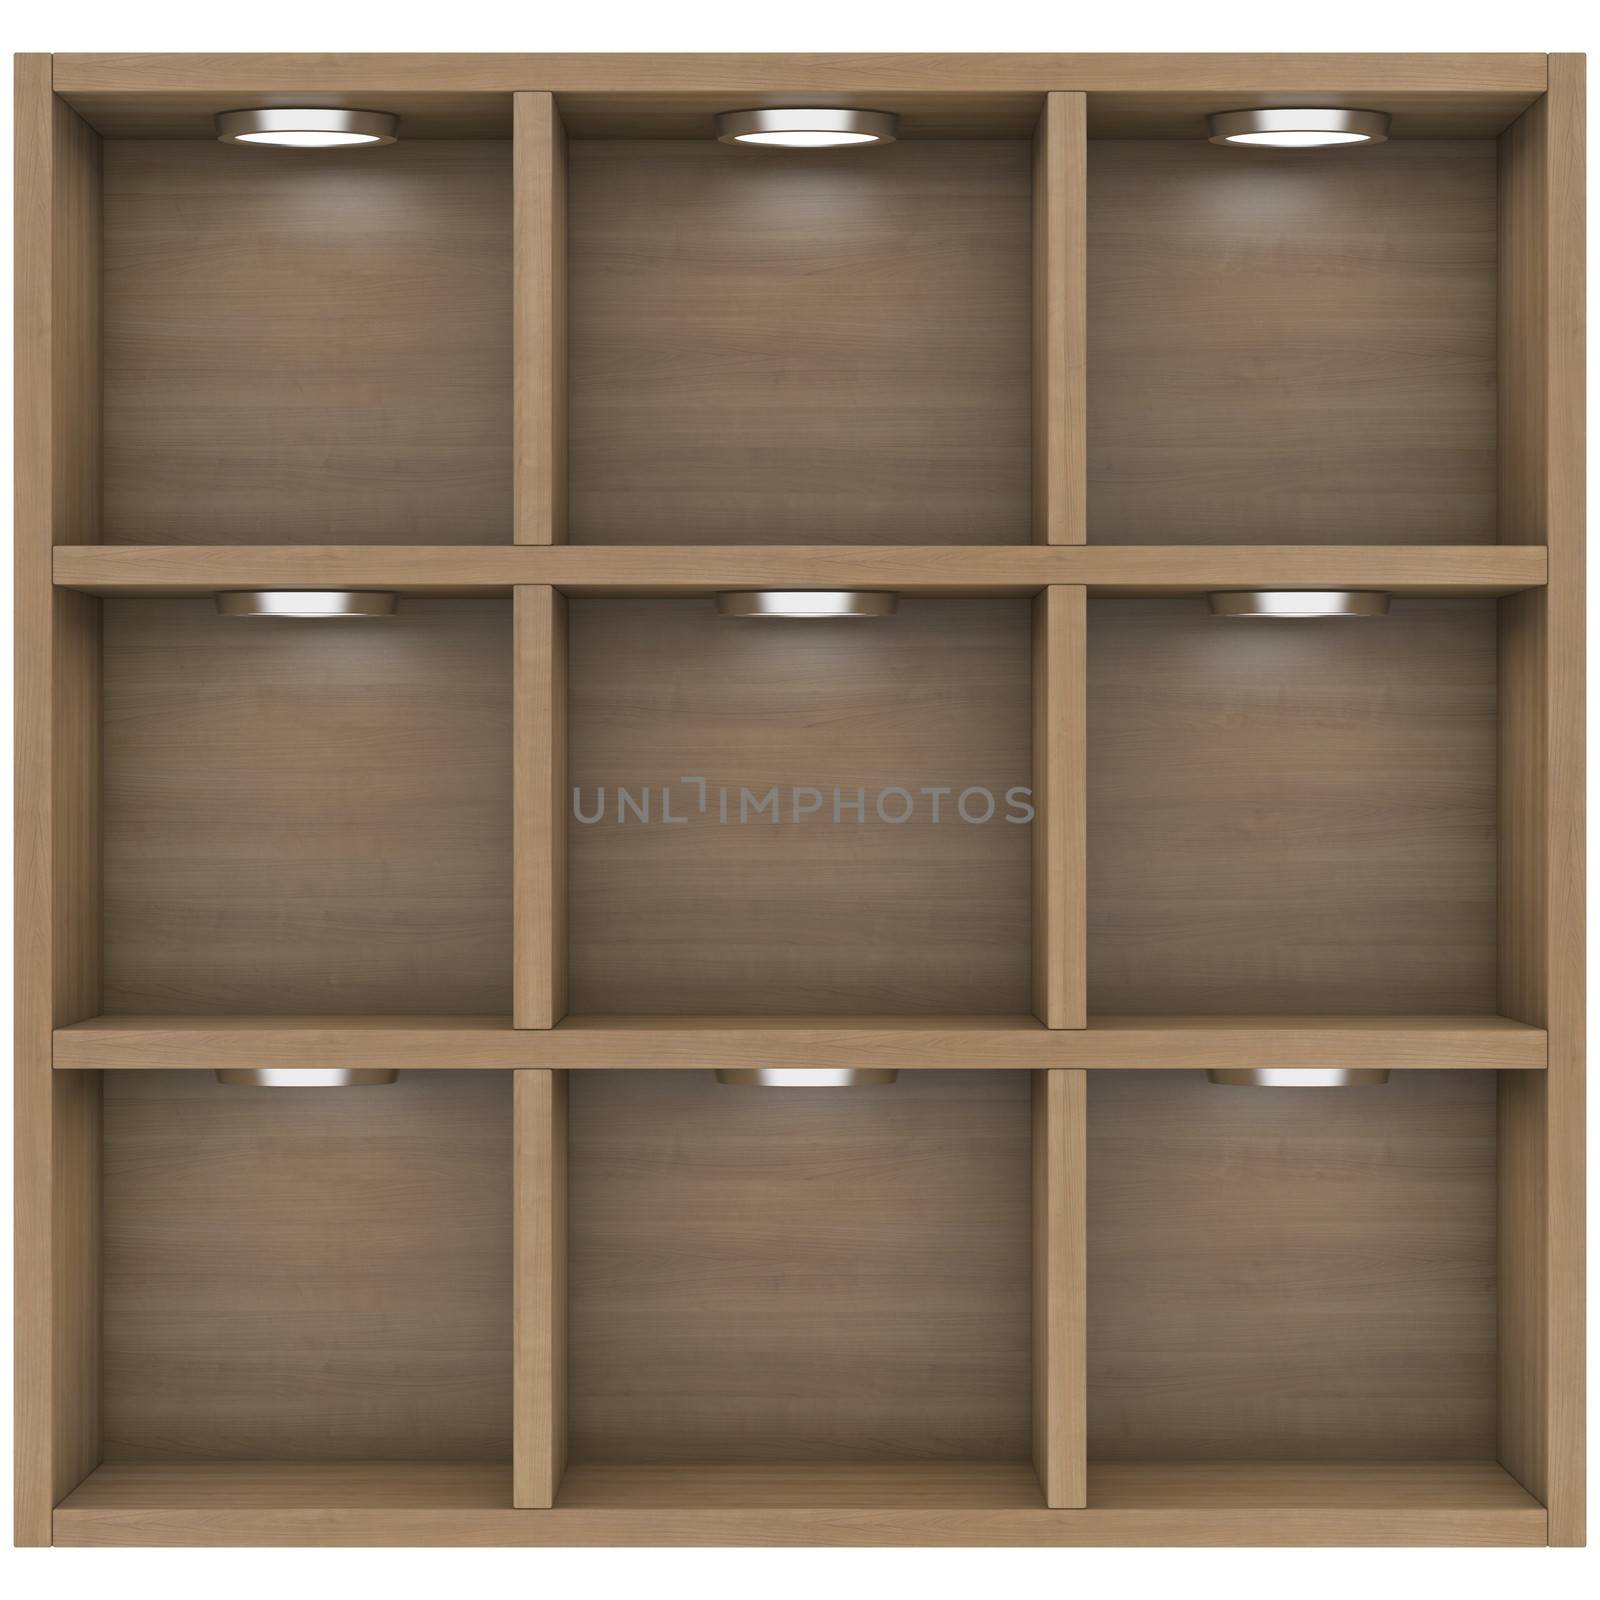 Wooden shelves with built-in lights. Isolated render on a white background